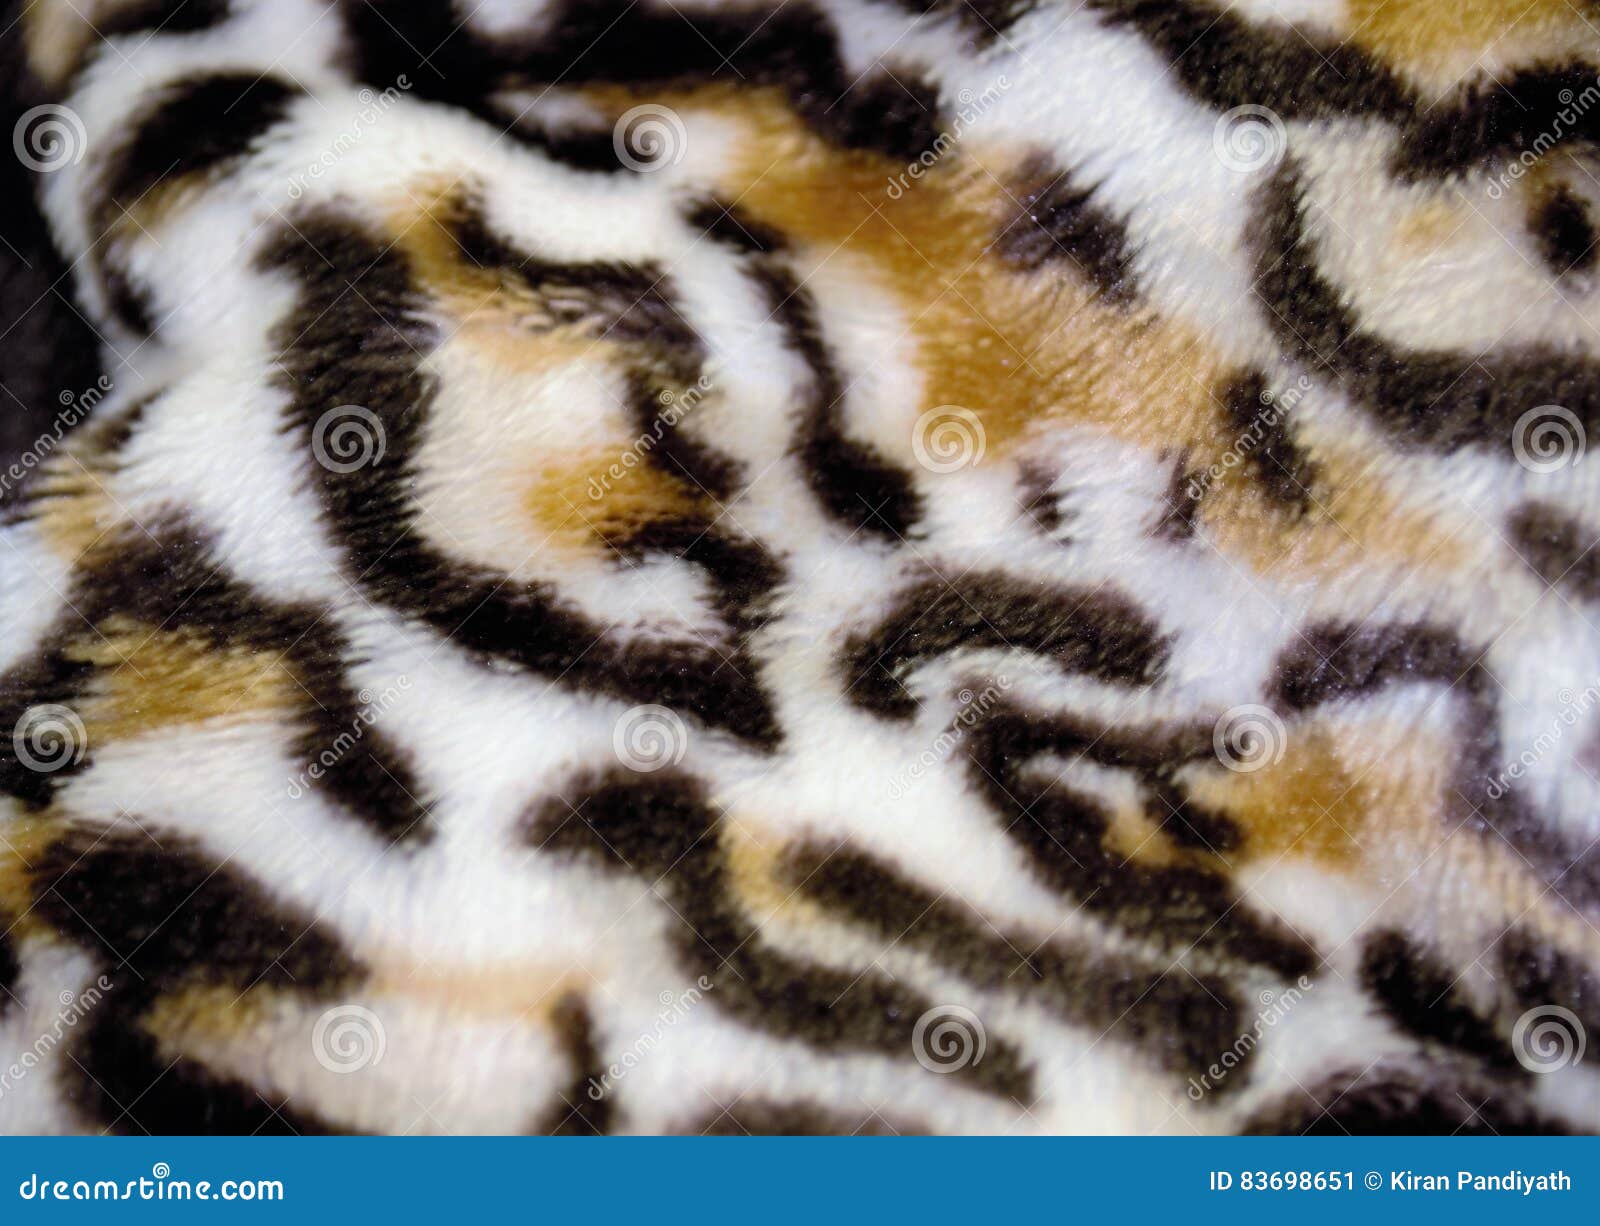 Tiger Skin Pattern Conch Design Stock Image - Image of conch, textile ...